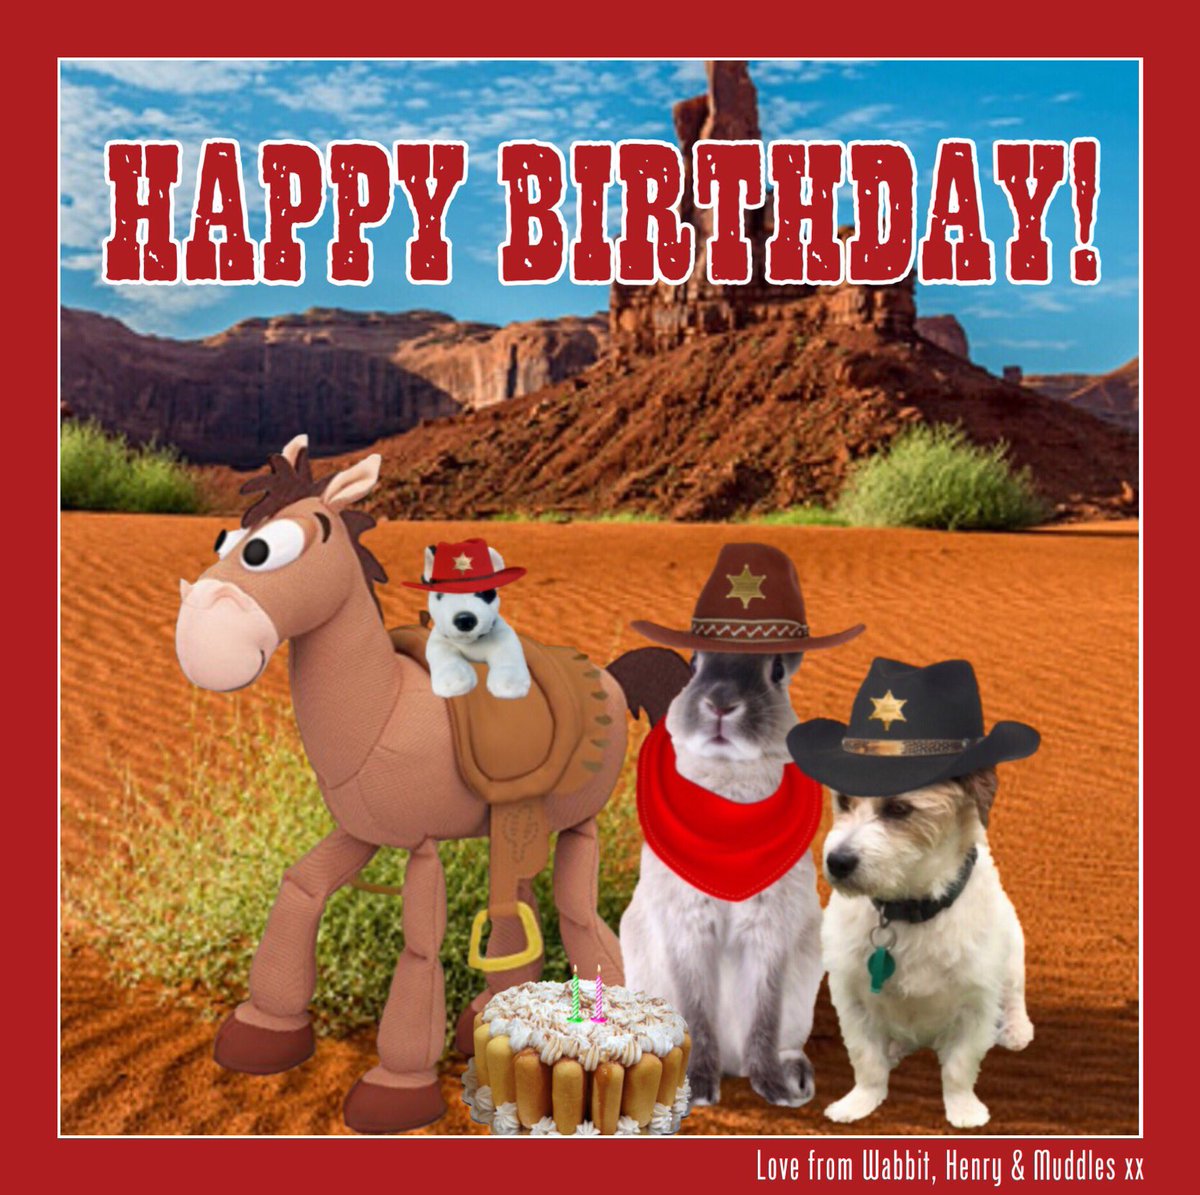 @ZombieSquadHQ @finlaybinlay @ZSBirthday @RhondaHendee @ThorSelfies @TheCatMalice @CancerDoggy 🎵Hoppy Burfday, dear WEE FINLAY Happy 3rd Burfday to youzzz!🎵 Wabbit, Henry & Iz hope youz are having a pawtastic time celebrating your special day, sweet pal. *group hugs* 🐰🐶🐶🎀💕💜🎂🎁🎈🎉 @finlaybinlay @ZombieSquadHQ #ZSHQ